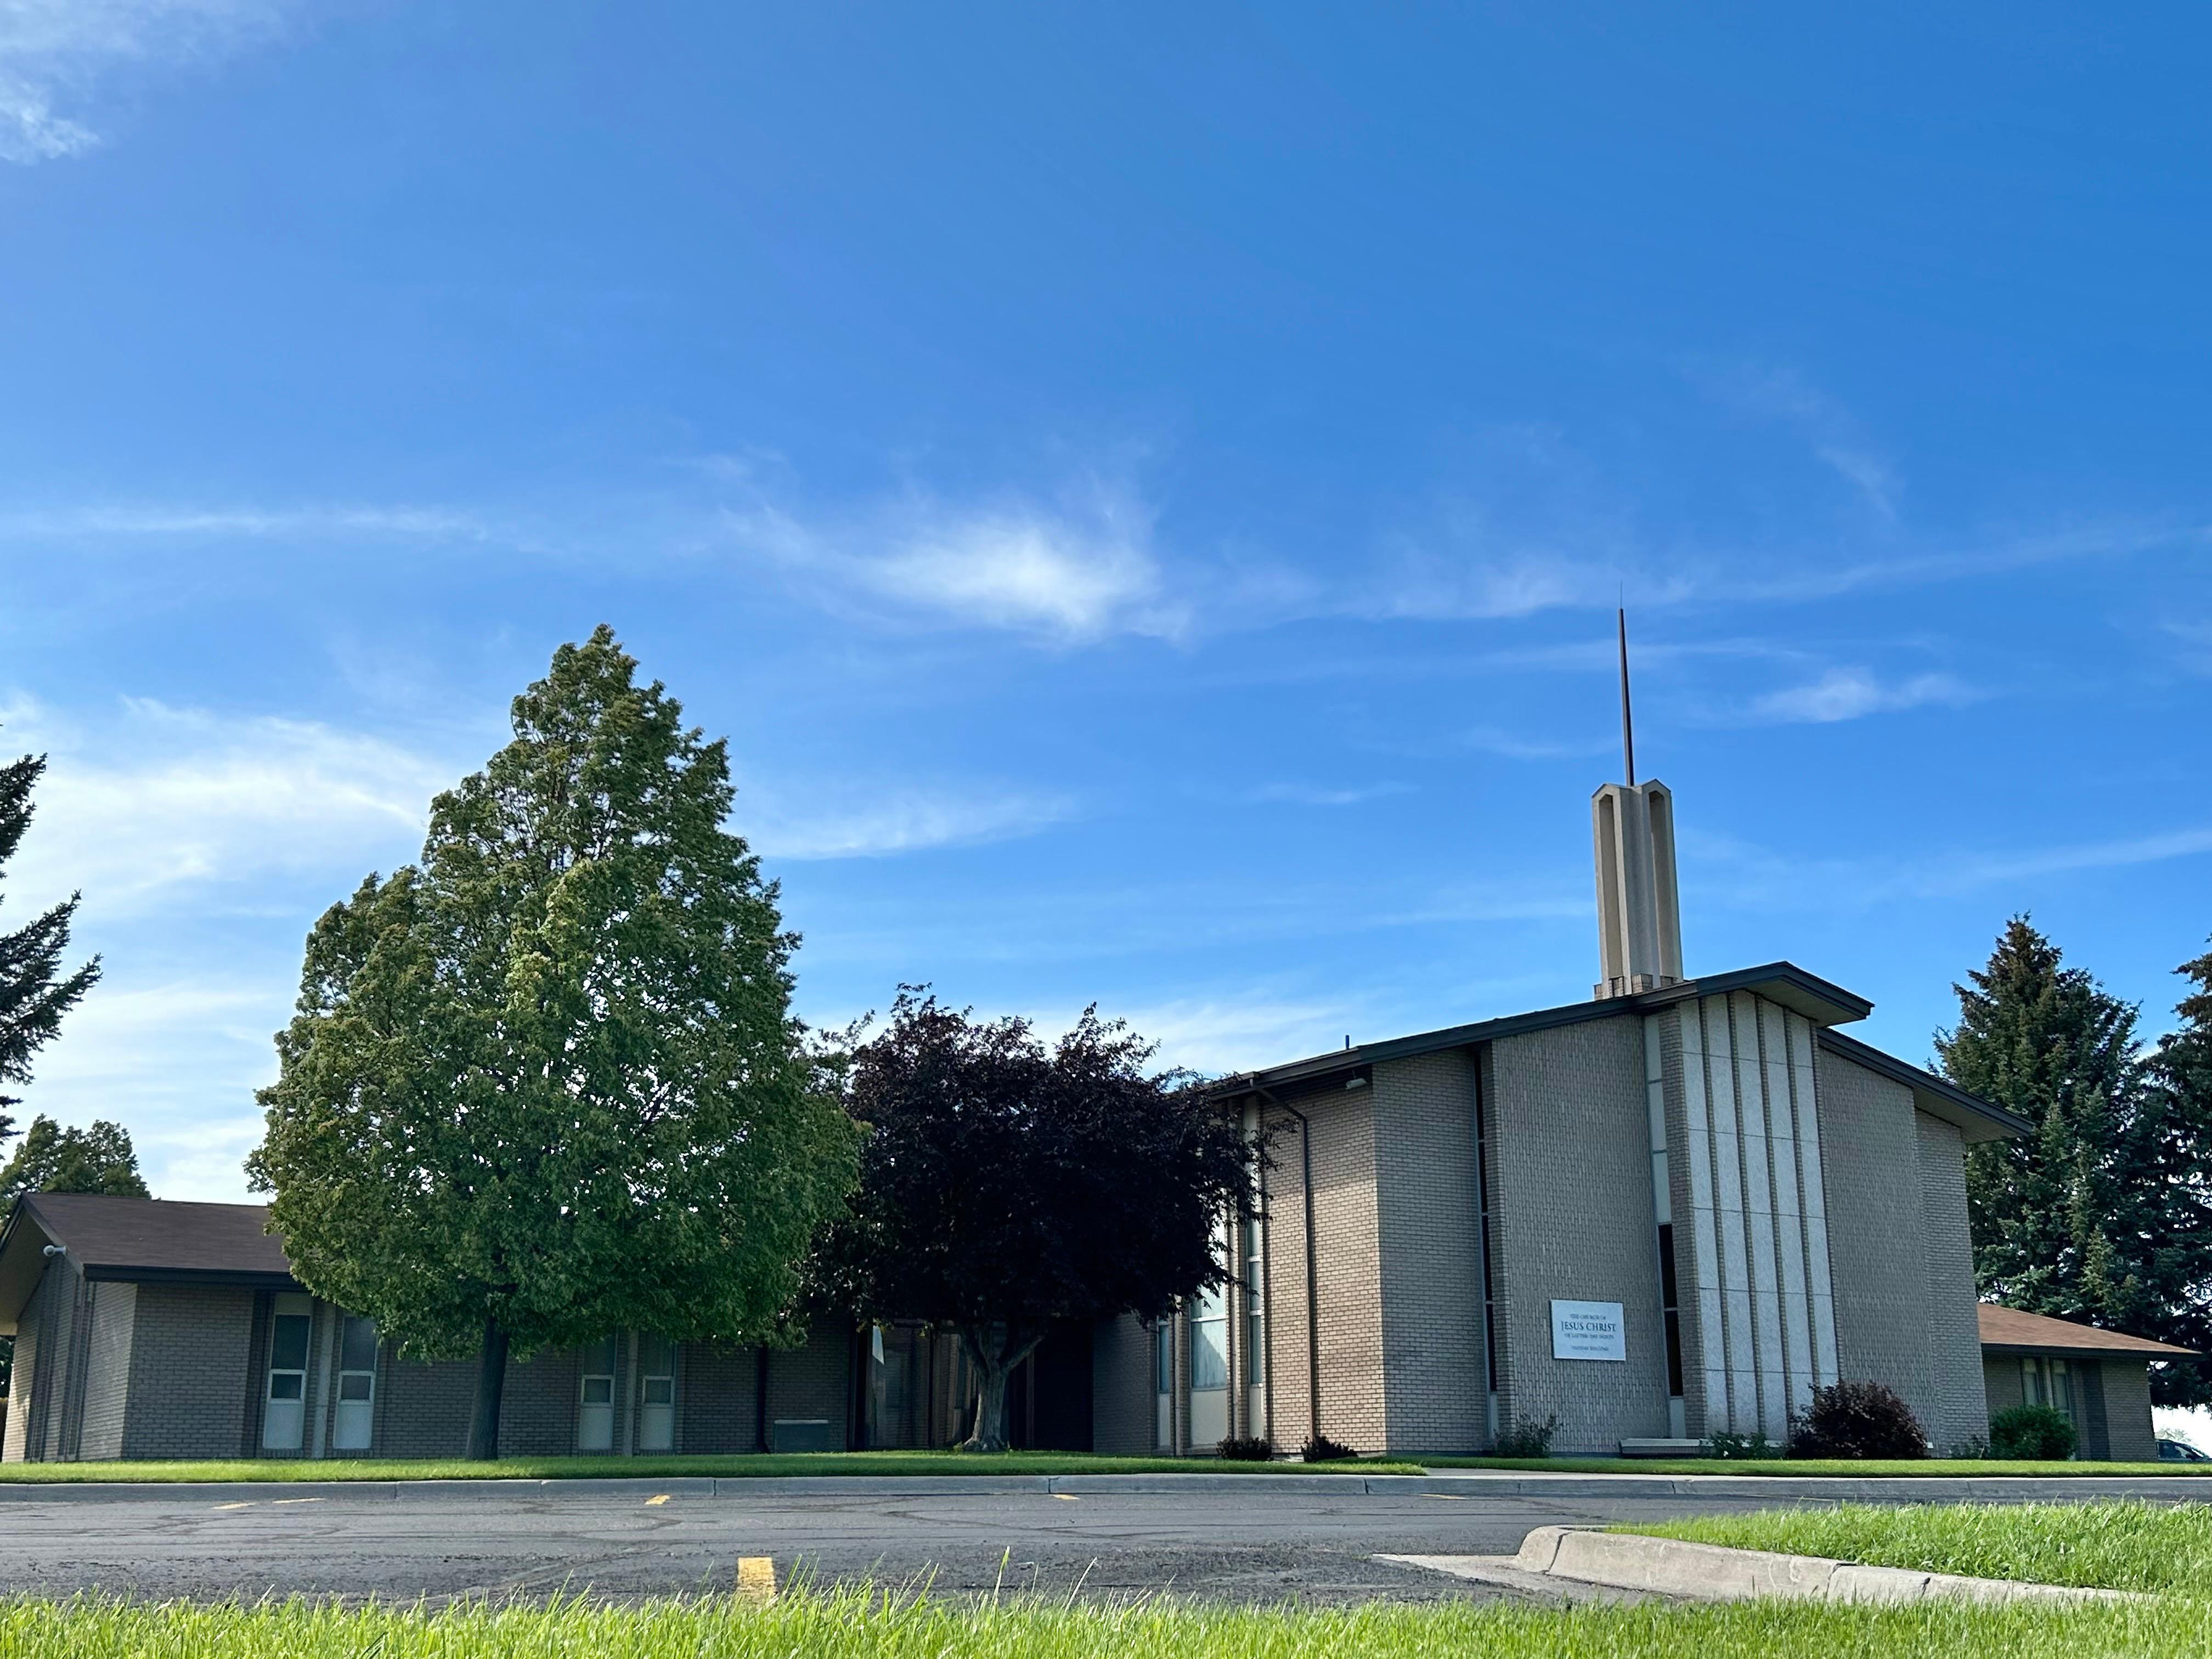 South Entrance of the Fort Hall Building of The Church of Jesus Christ of Latter-Day Saints located at 333 South Treaty Hwy (US 91)
in Pocatello, ID.